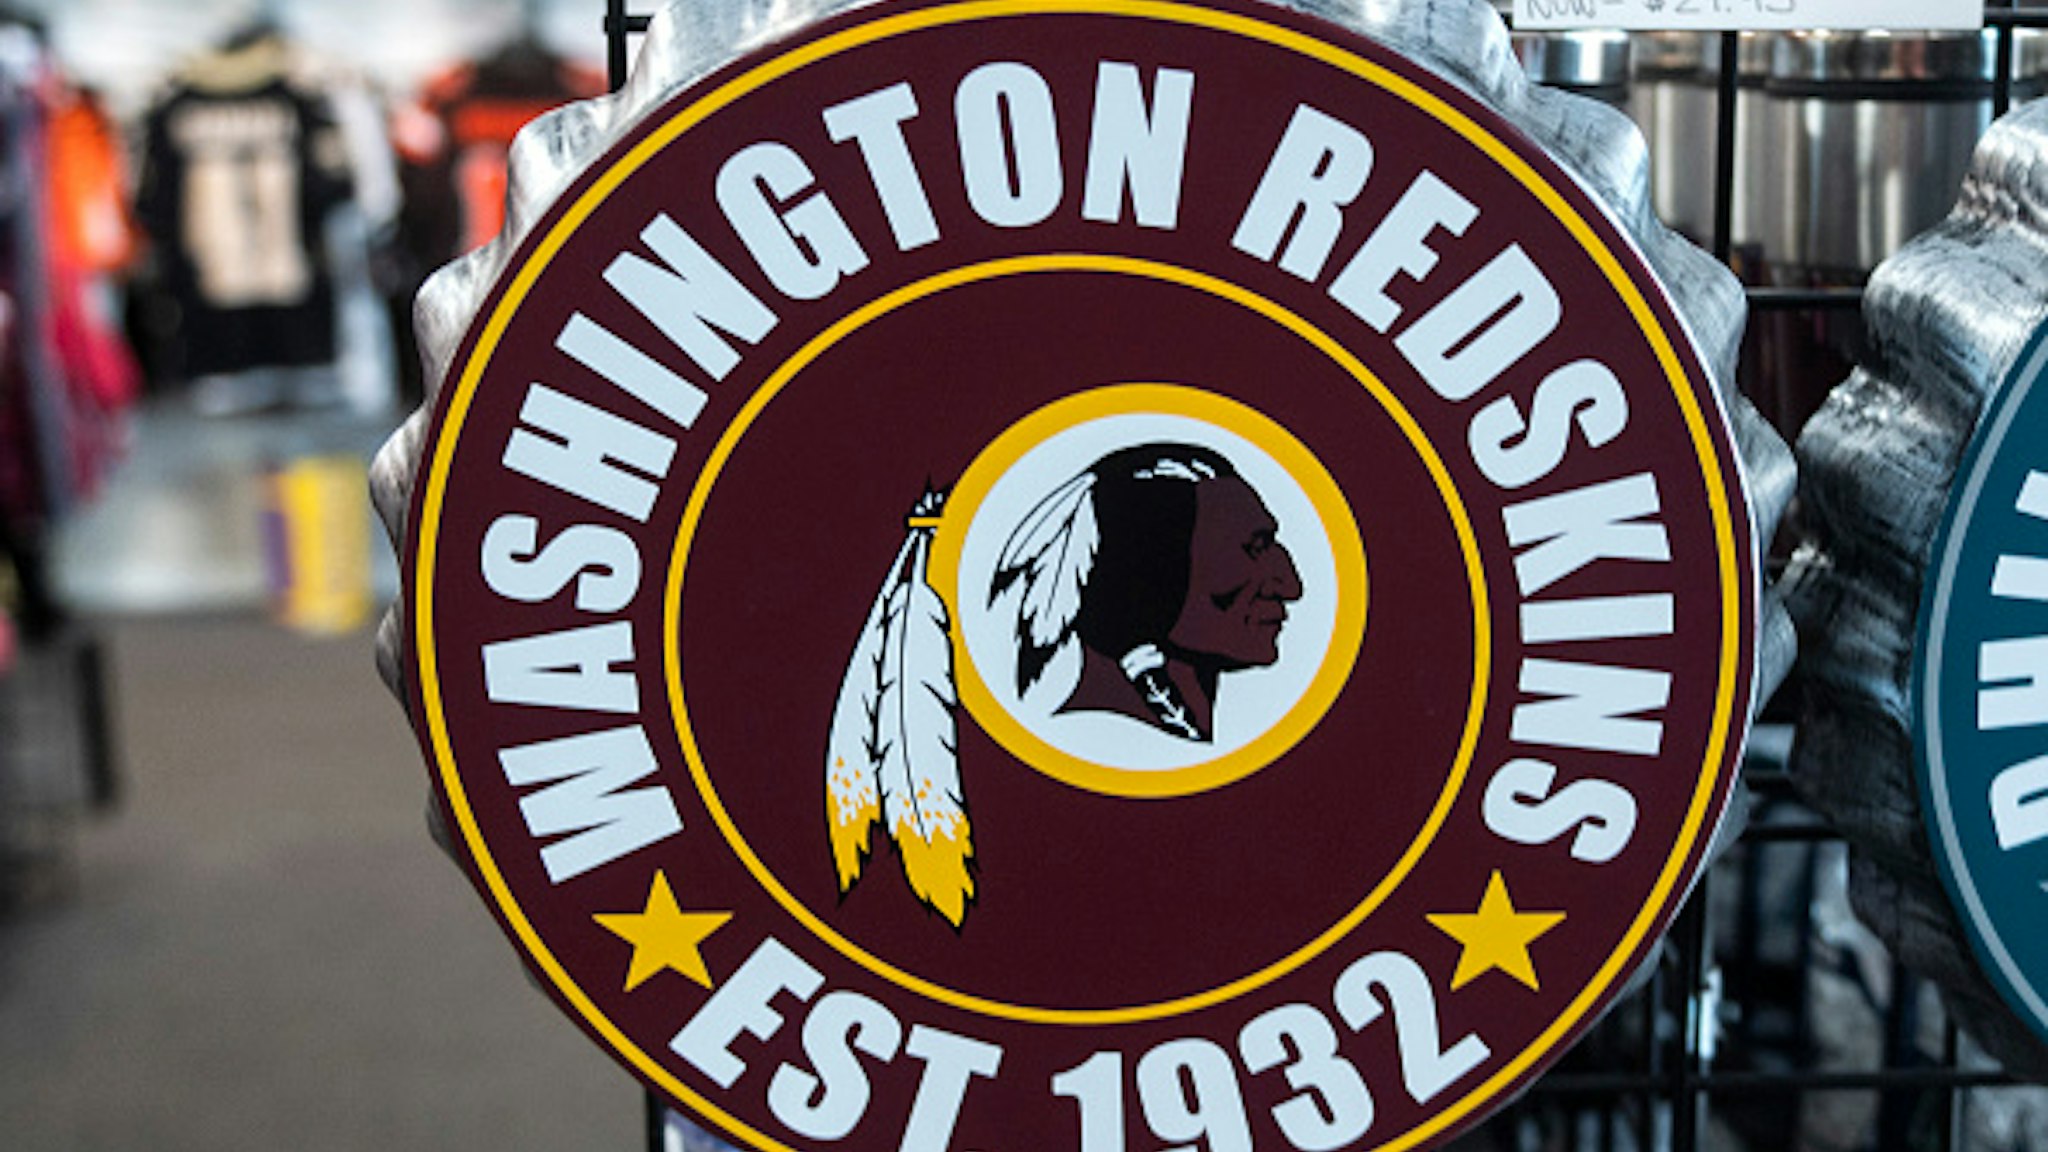 Washington Redskins merchandise is seen for sale at a sports store in Fairfax, Virginia on July 13, 2020. - The Washington Redskins confirmed on July 13 that the team is changing its name following pressure from sponsors over a word widely criticized as a racist slur against Native Americans.